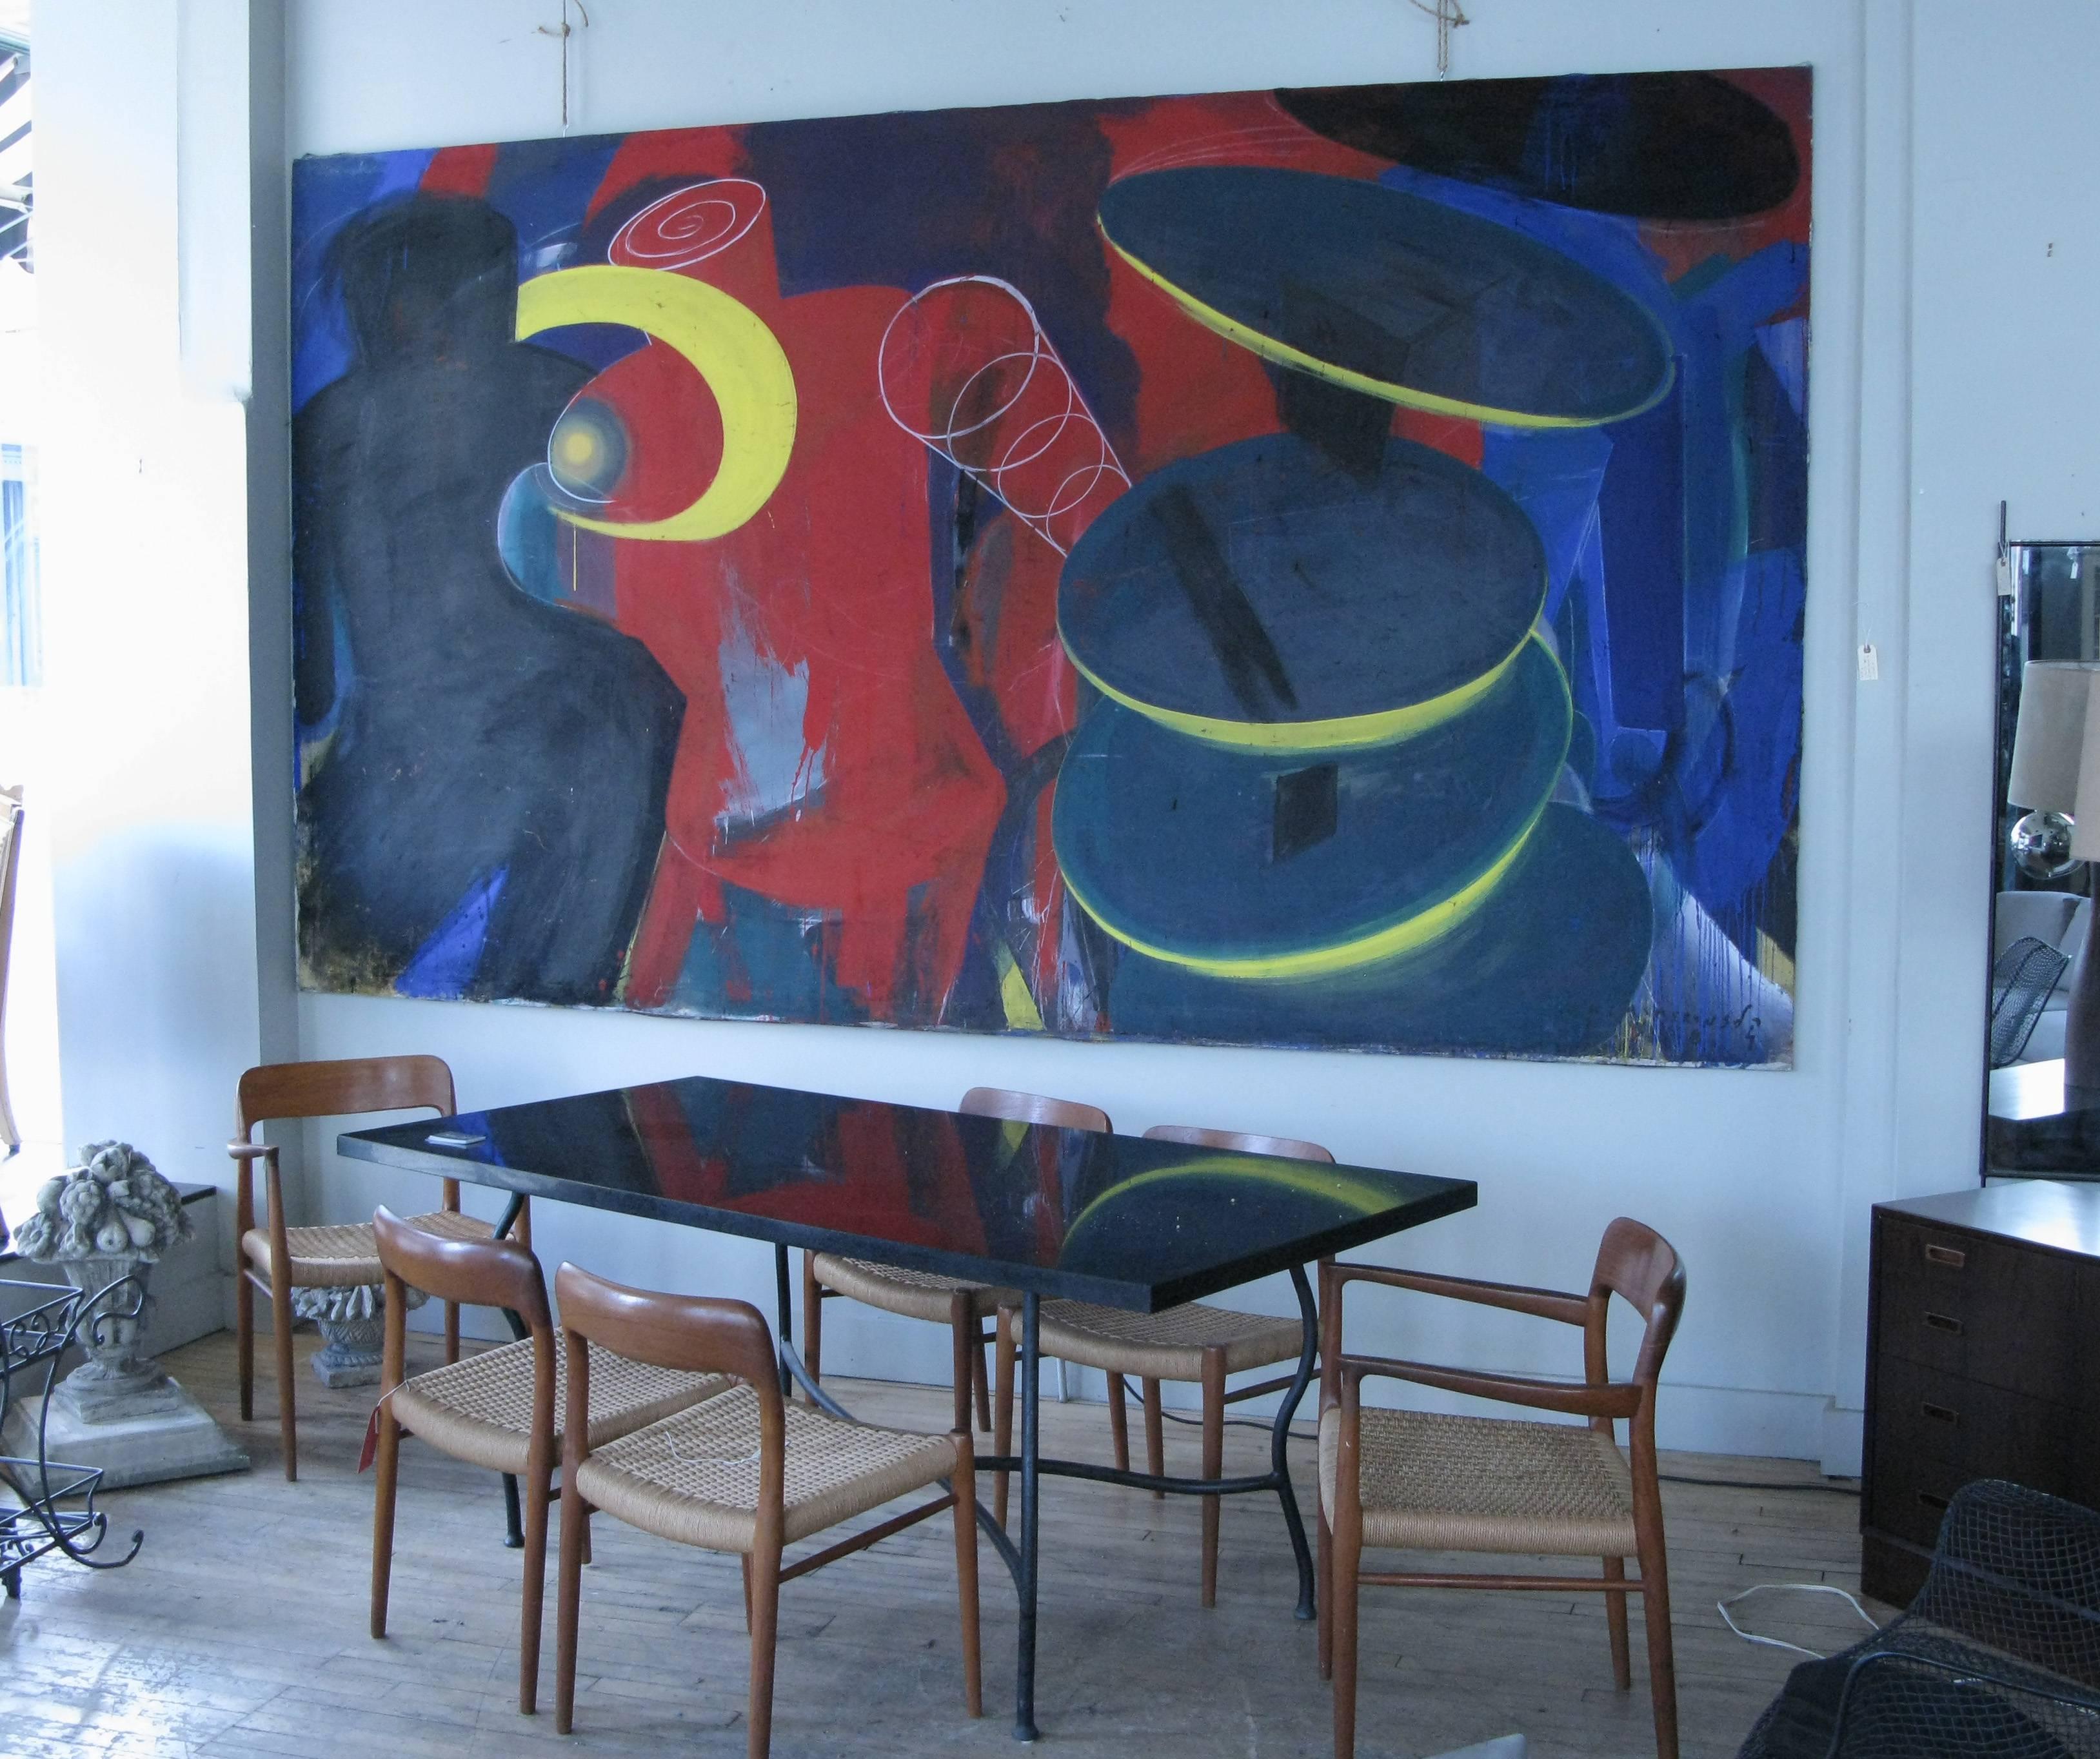 A very large-scale modern painting by London based, Israeli artist Gabriel Klasmer in oil and pastel on canvas. Klasmer's paintings are in the collection of the Museum of Modern Art.